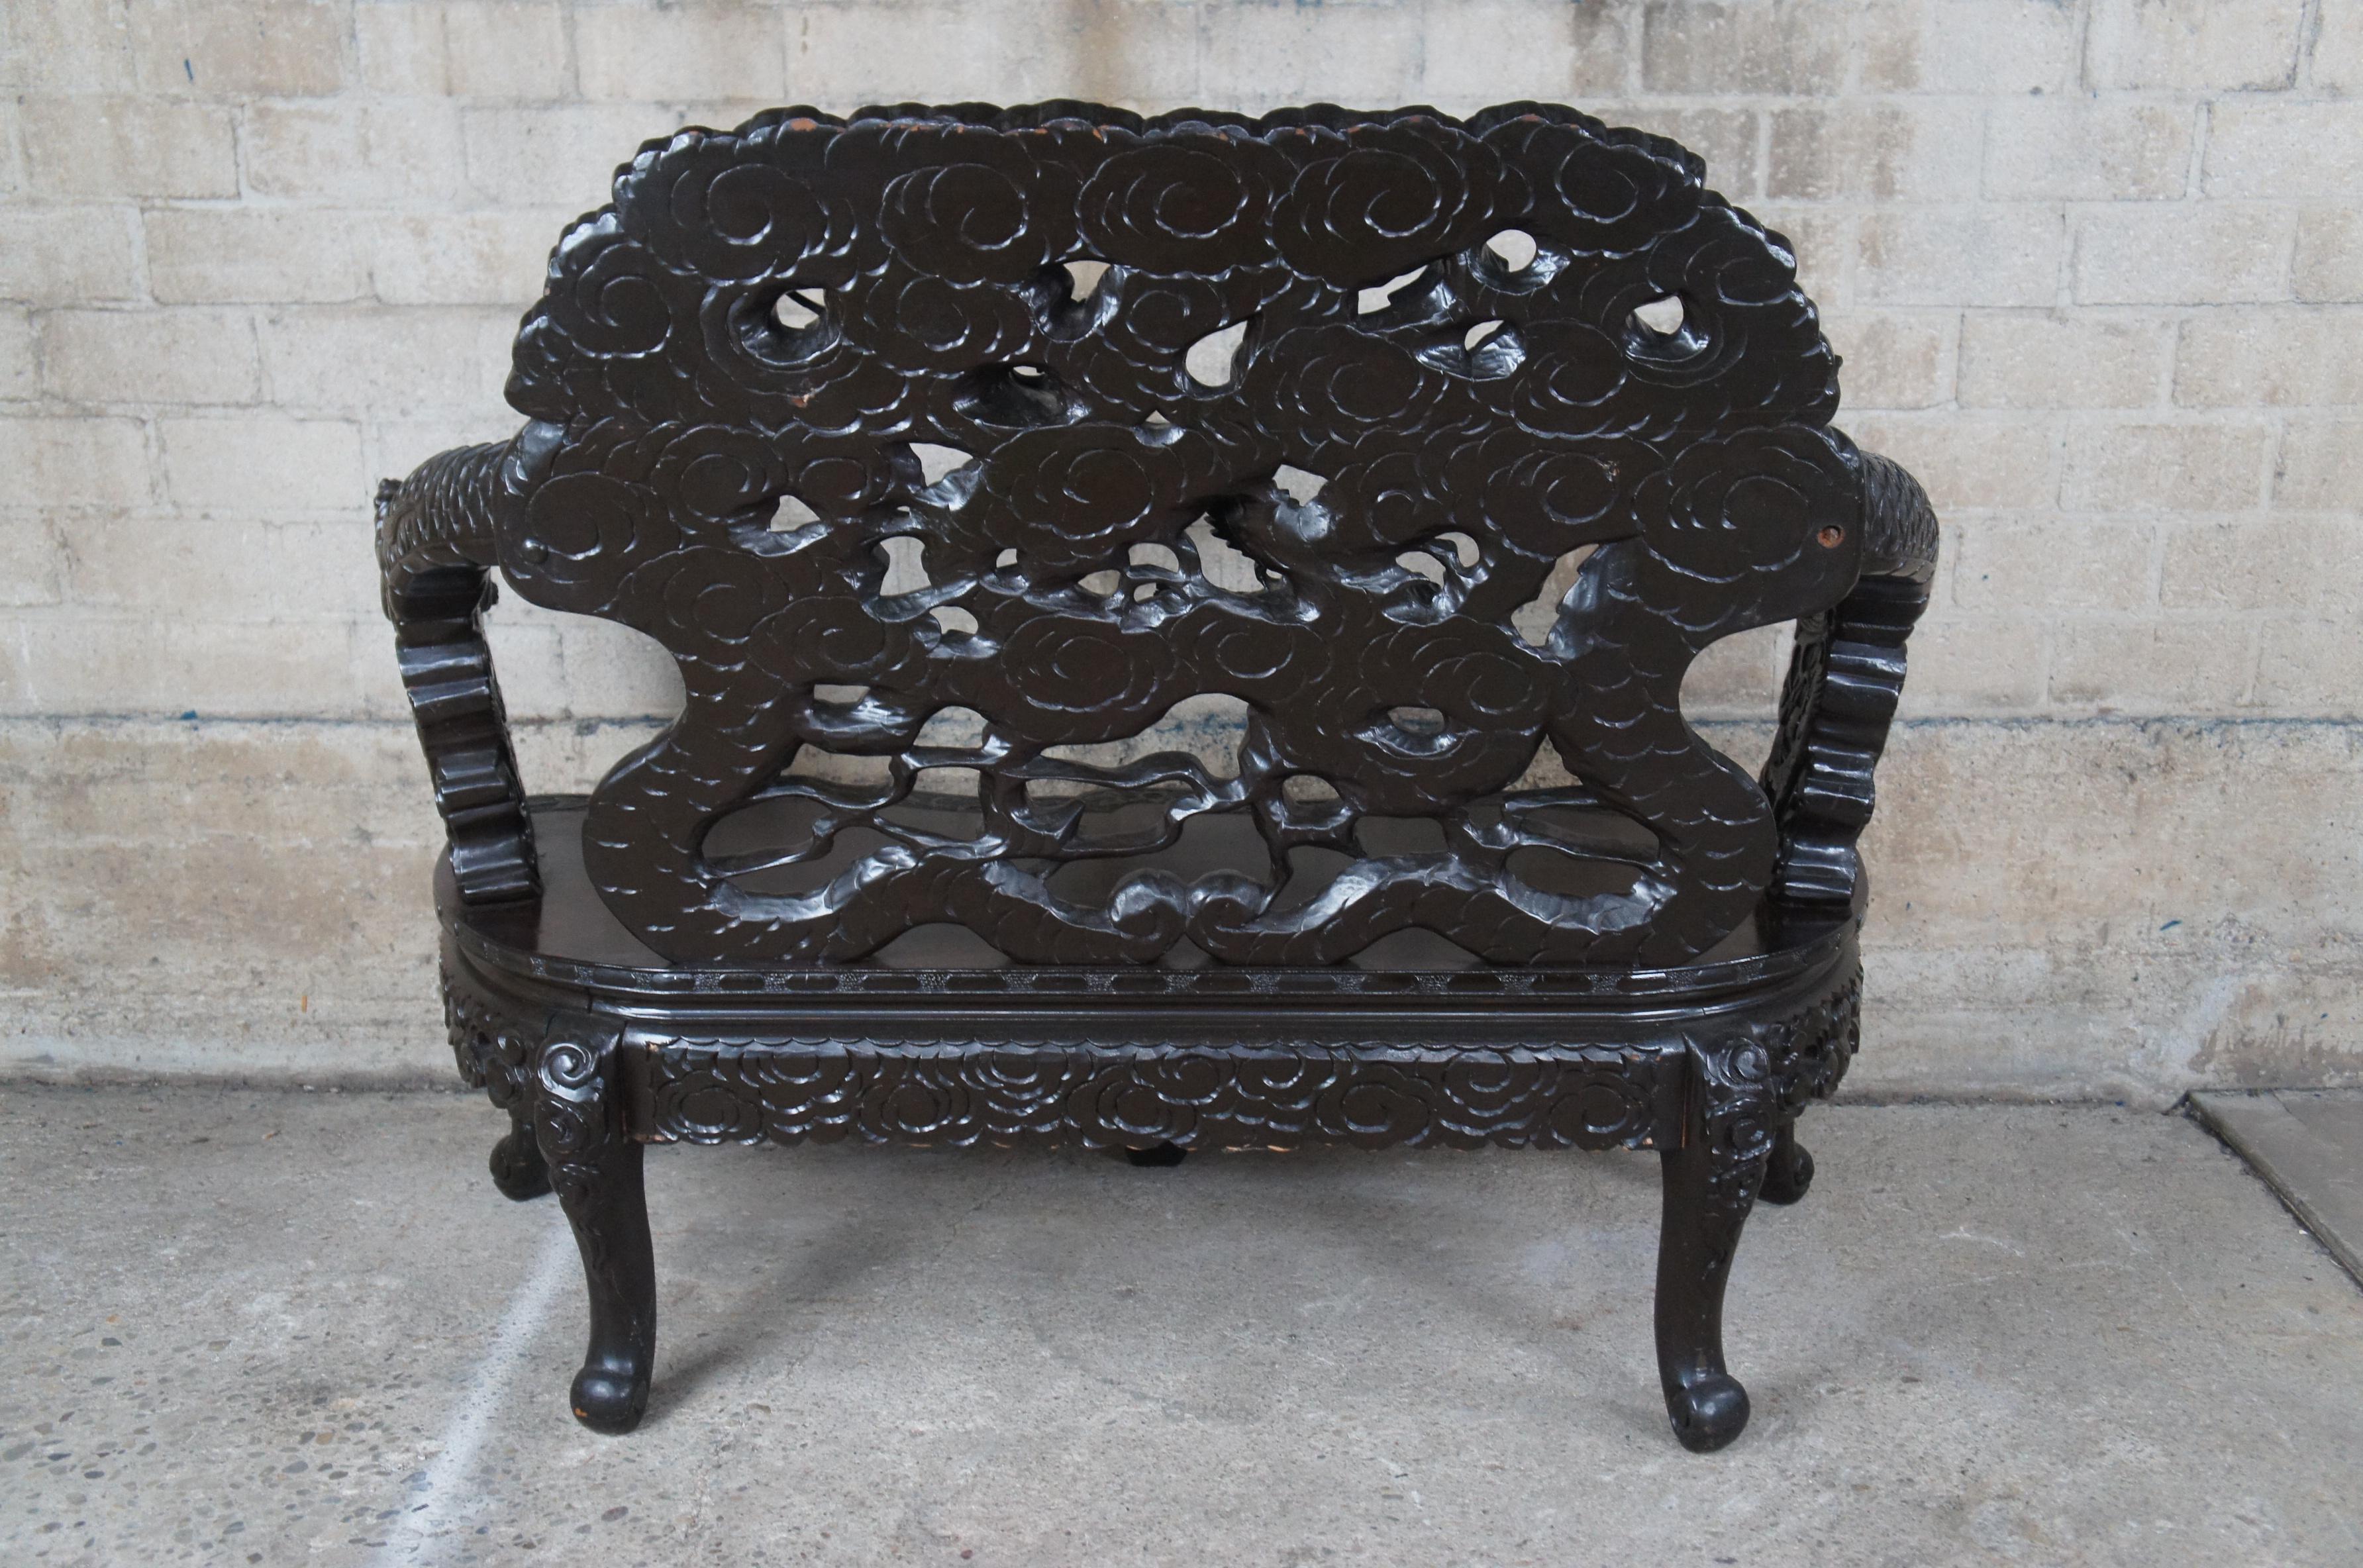 Antique Imperial Meiji Japanese Ebonized High Relief Carved Dragon Bench For Sale 6